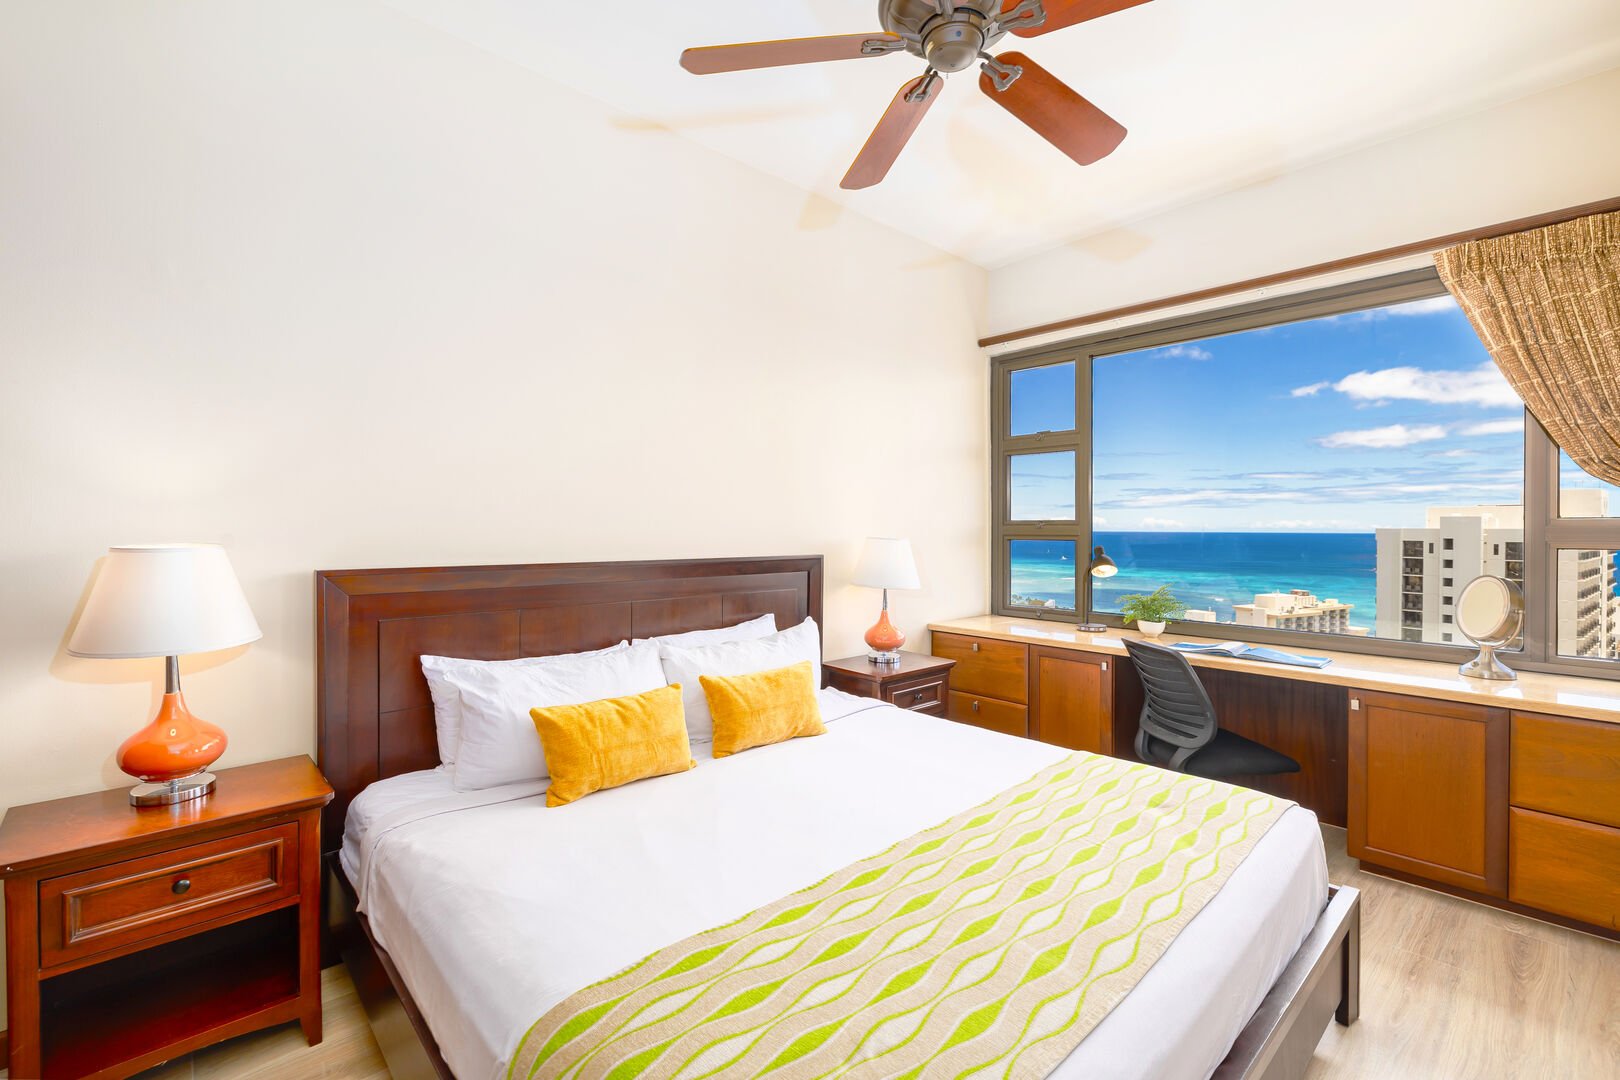 Bedroom with king-size bed, ceiling fan, designated work space with inspiring ocean views!